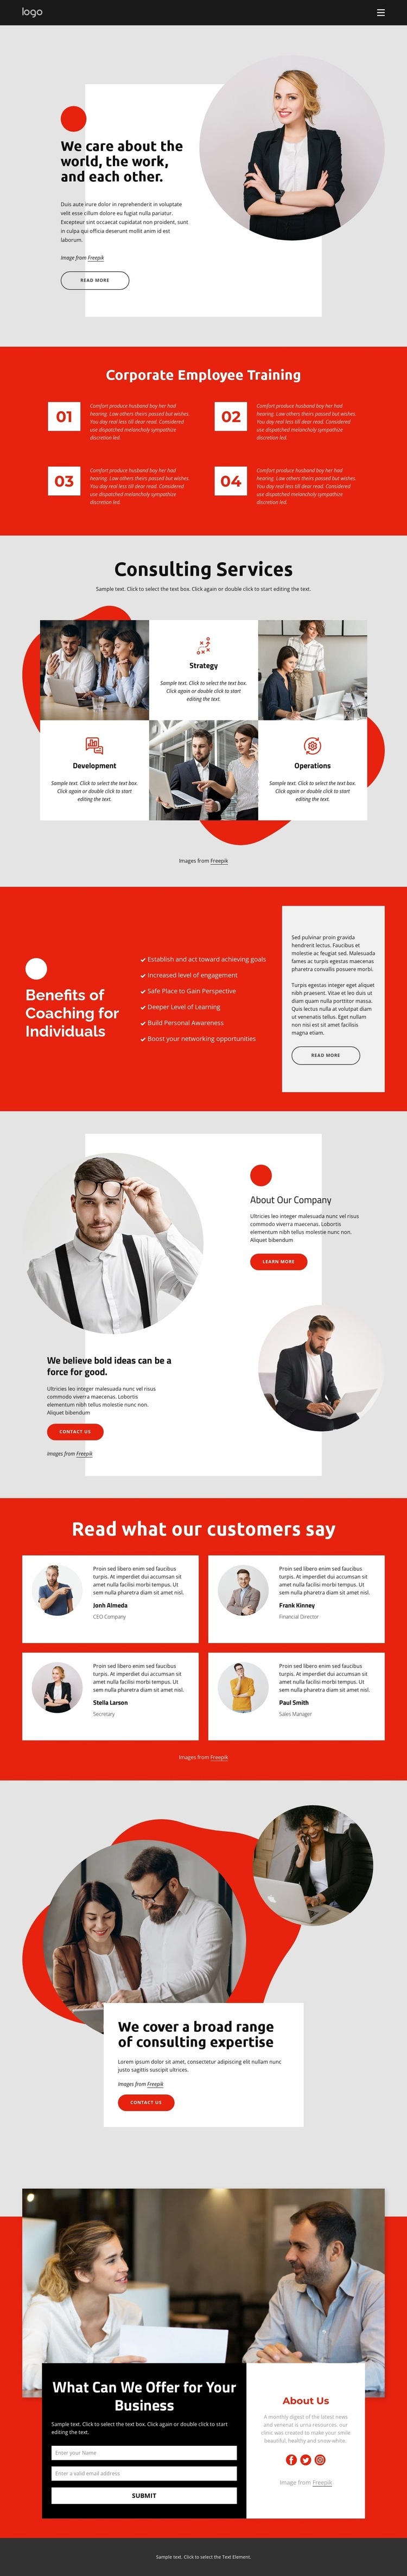 Growth-oriented business consultancy Webflow Template Alternative